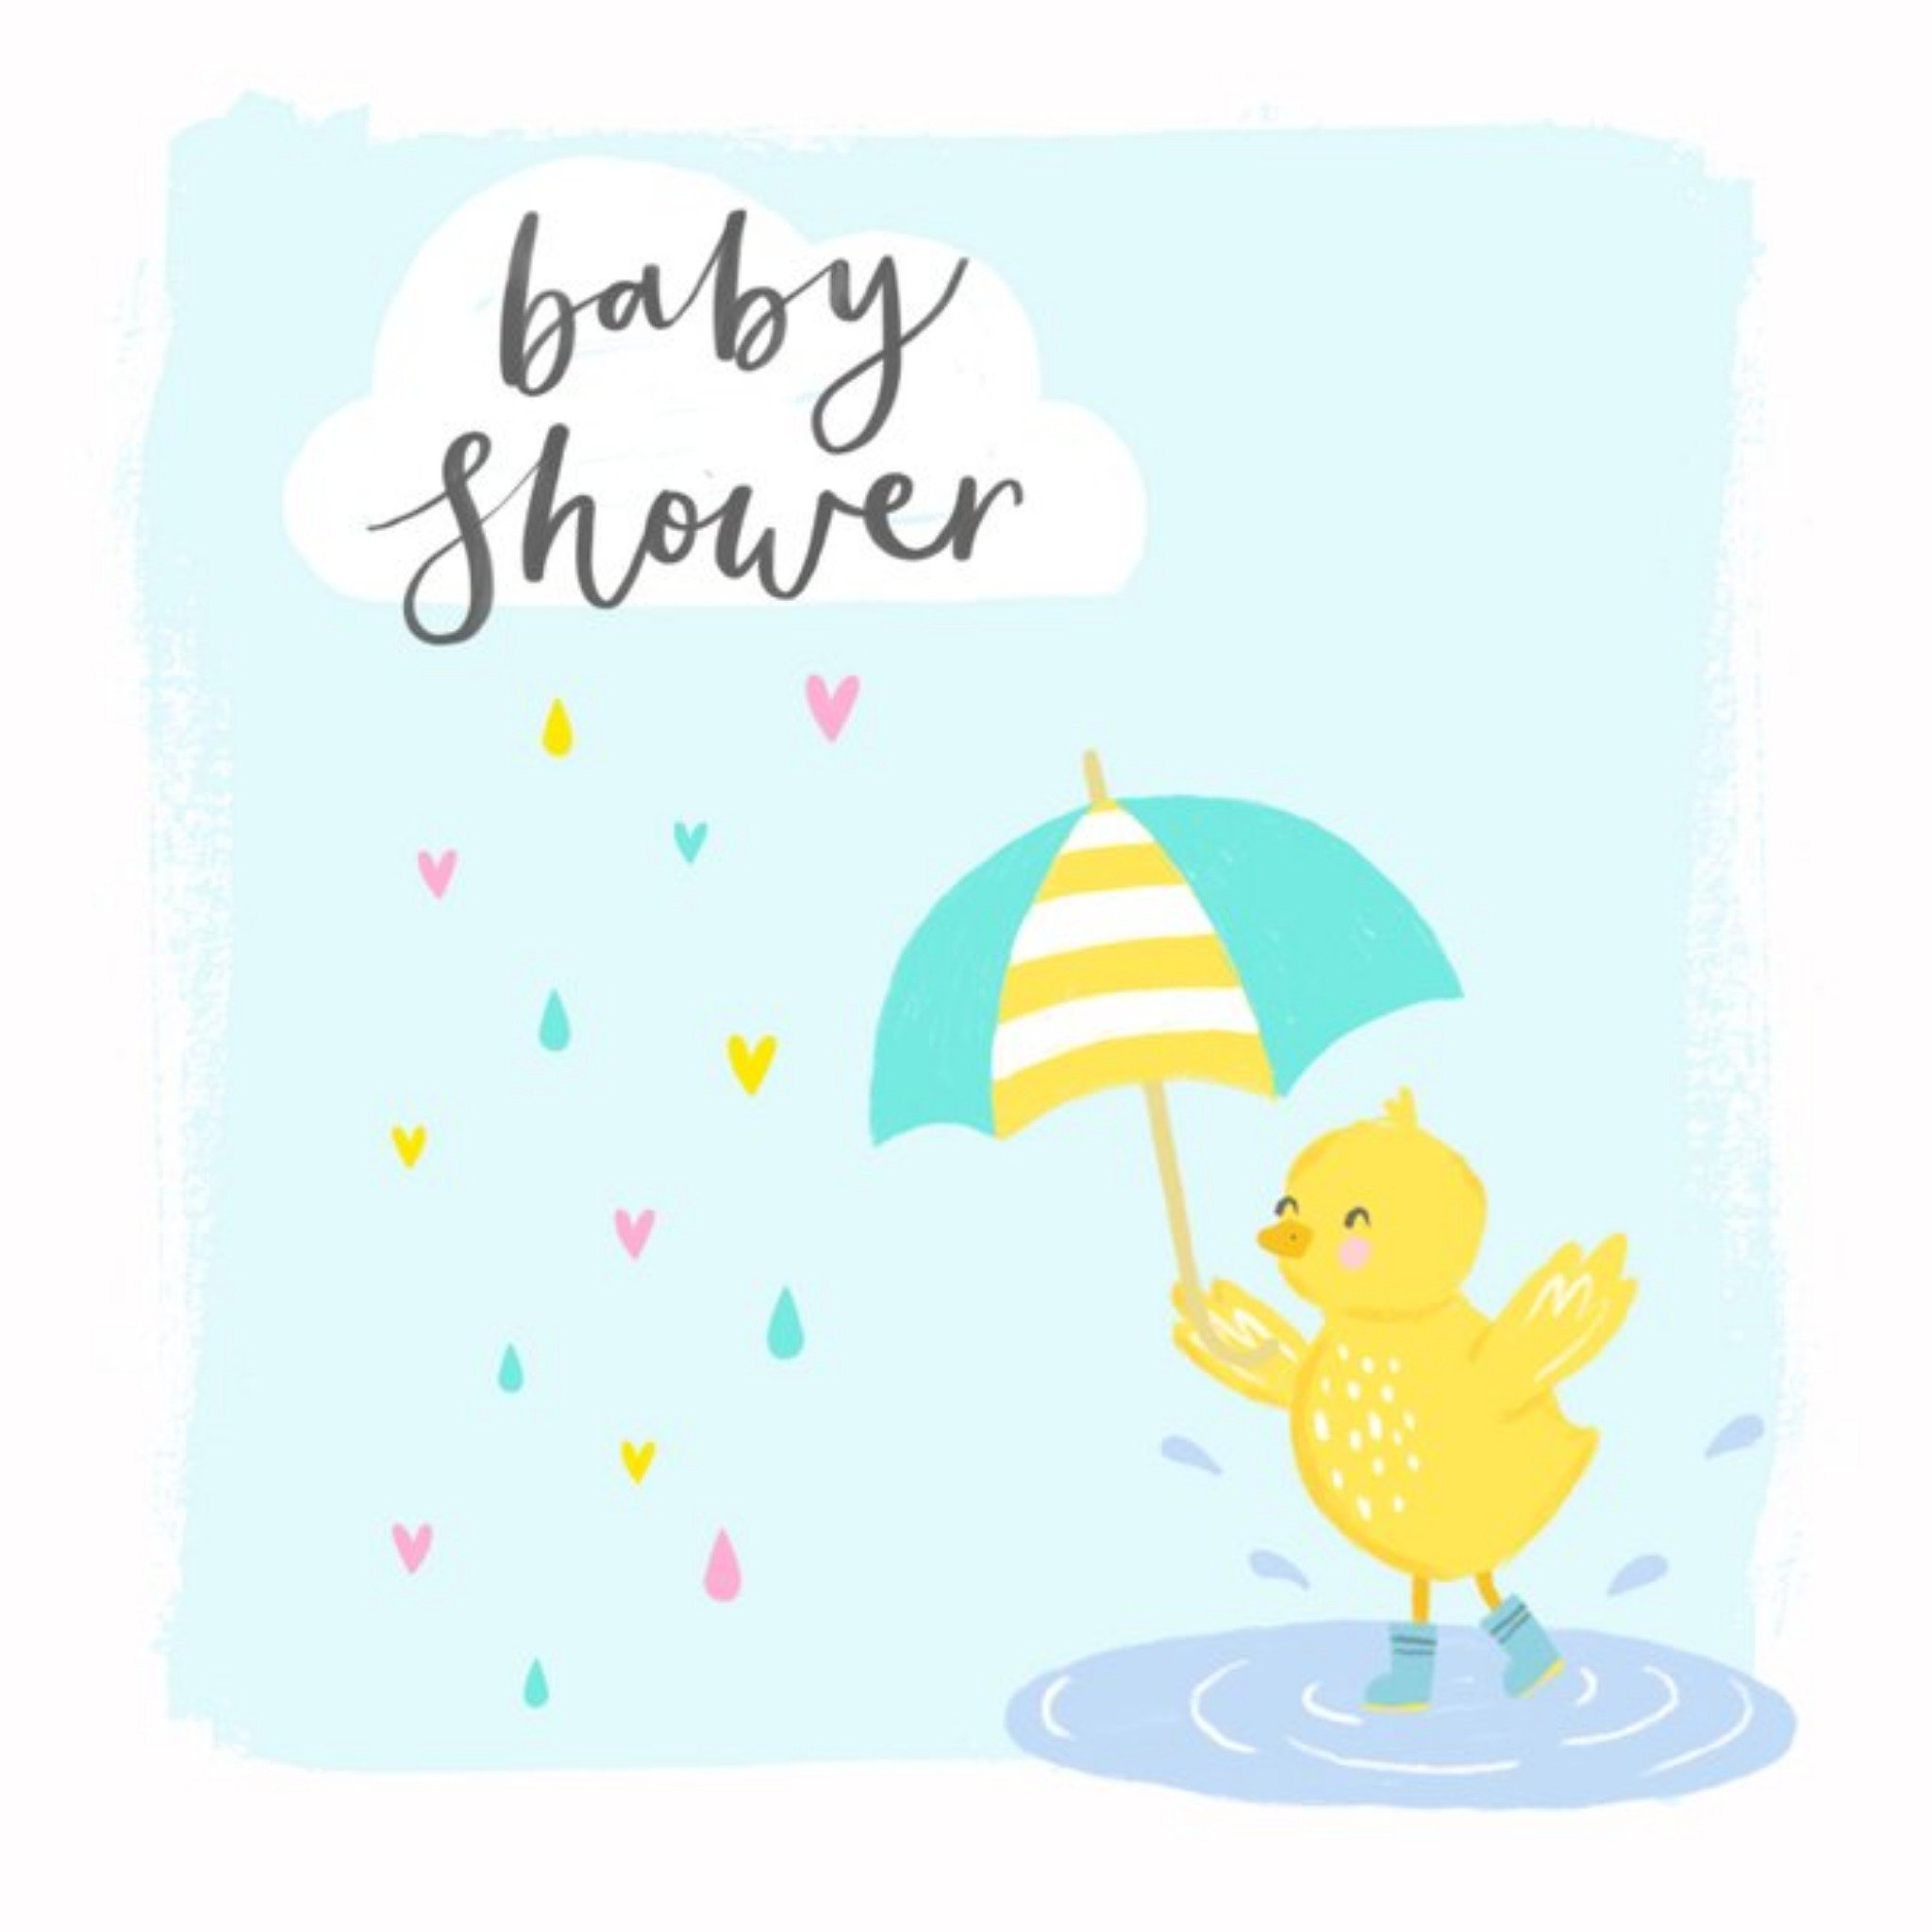 Moonpig Cute Illustrated Baby Chick Baby Shower Card, Square